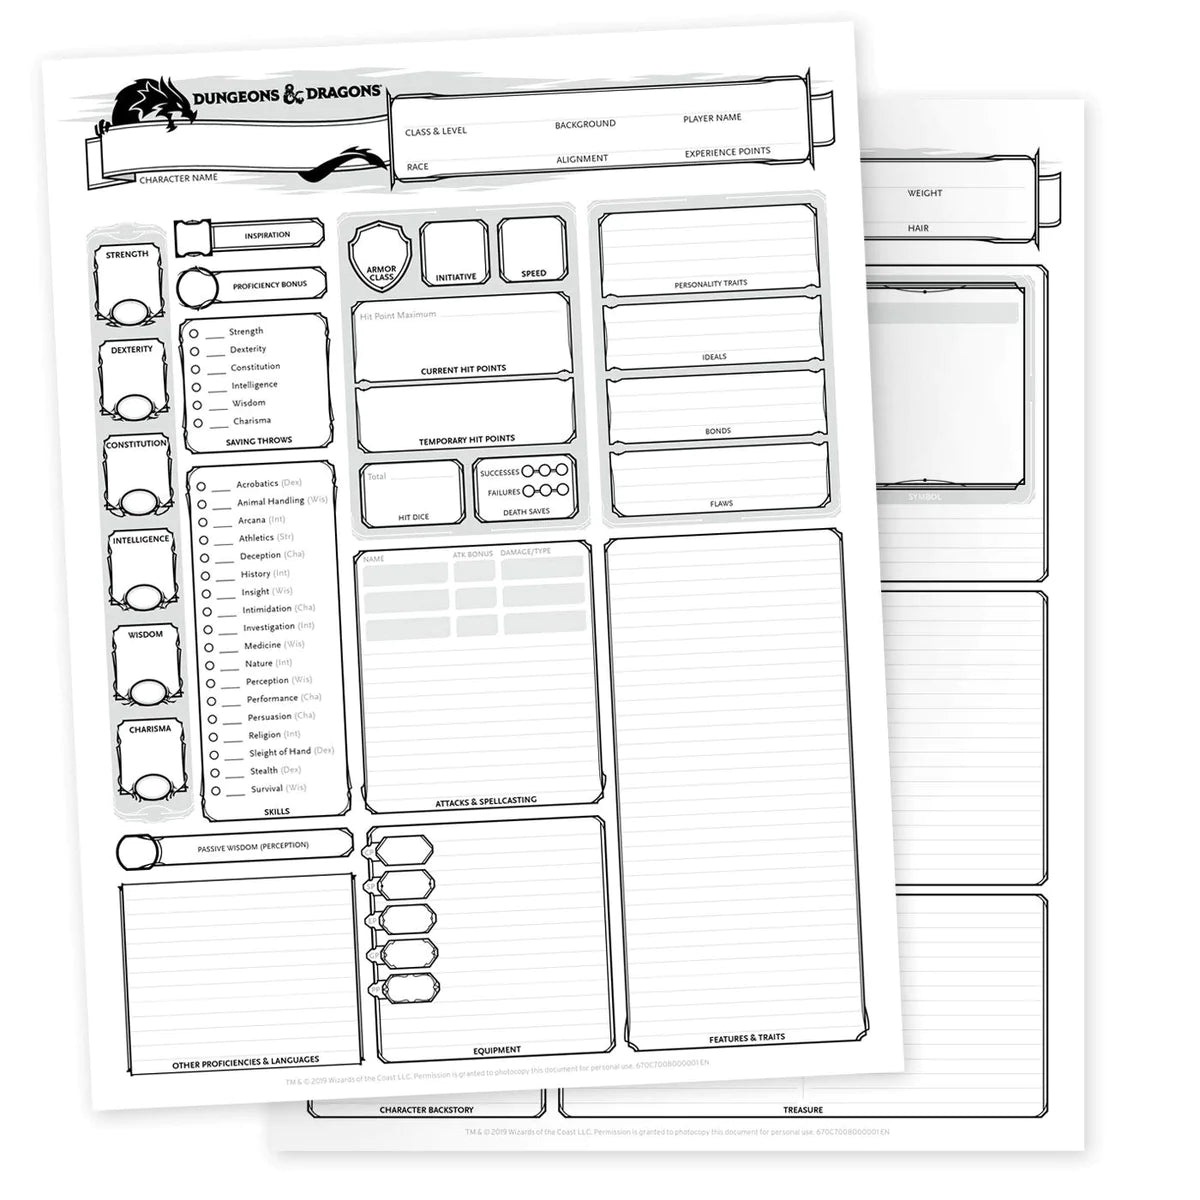 Dungeons & Dragons - Character Sheets - Loaded Dice Barry Vale of Glamorgan CF64 3HD